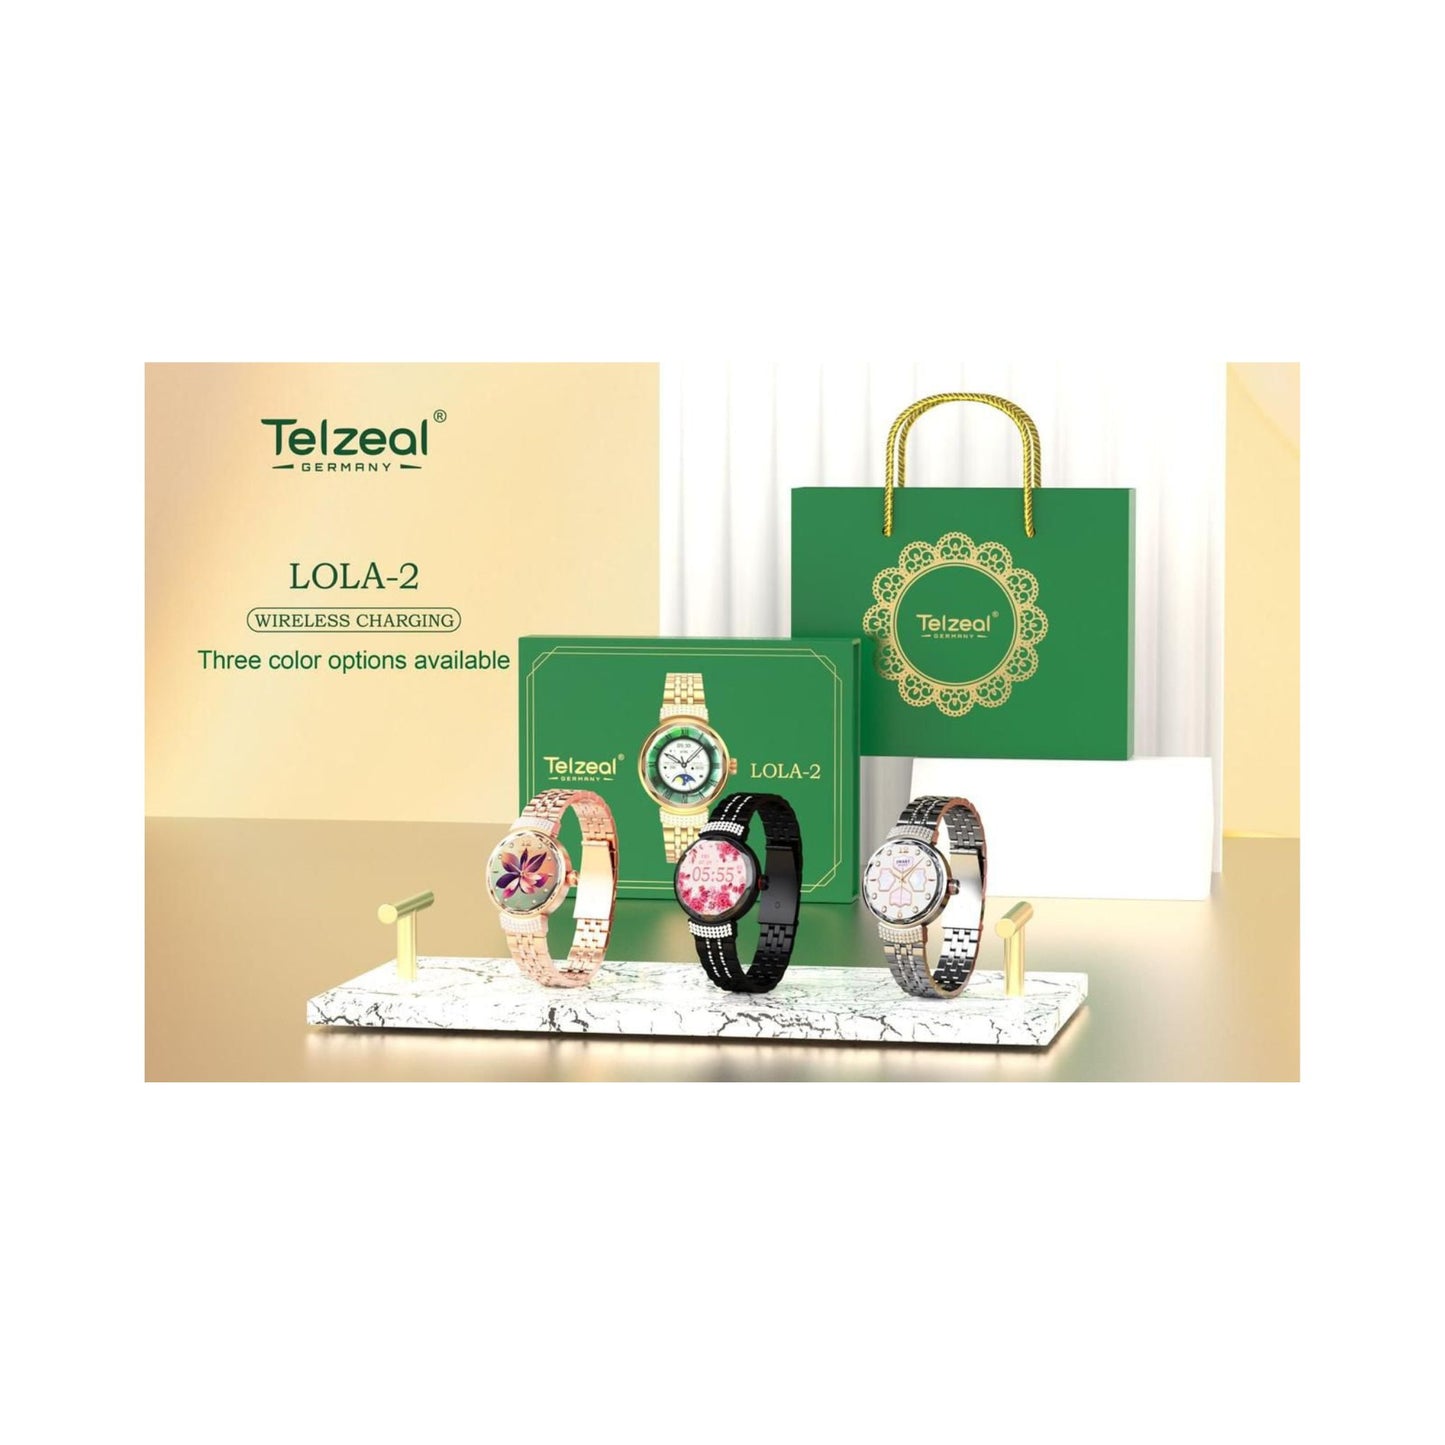 Telzeal Germany LOLA-2 Two Pairs Strap Smartwatches_Gold